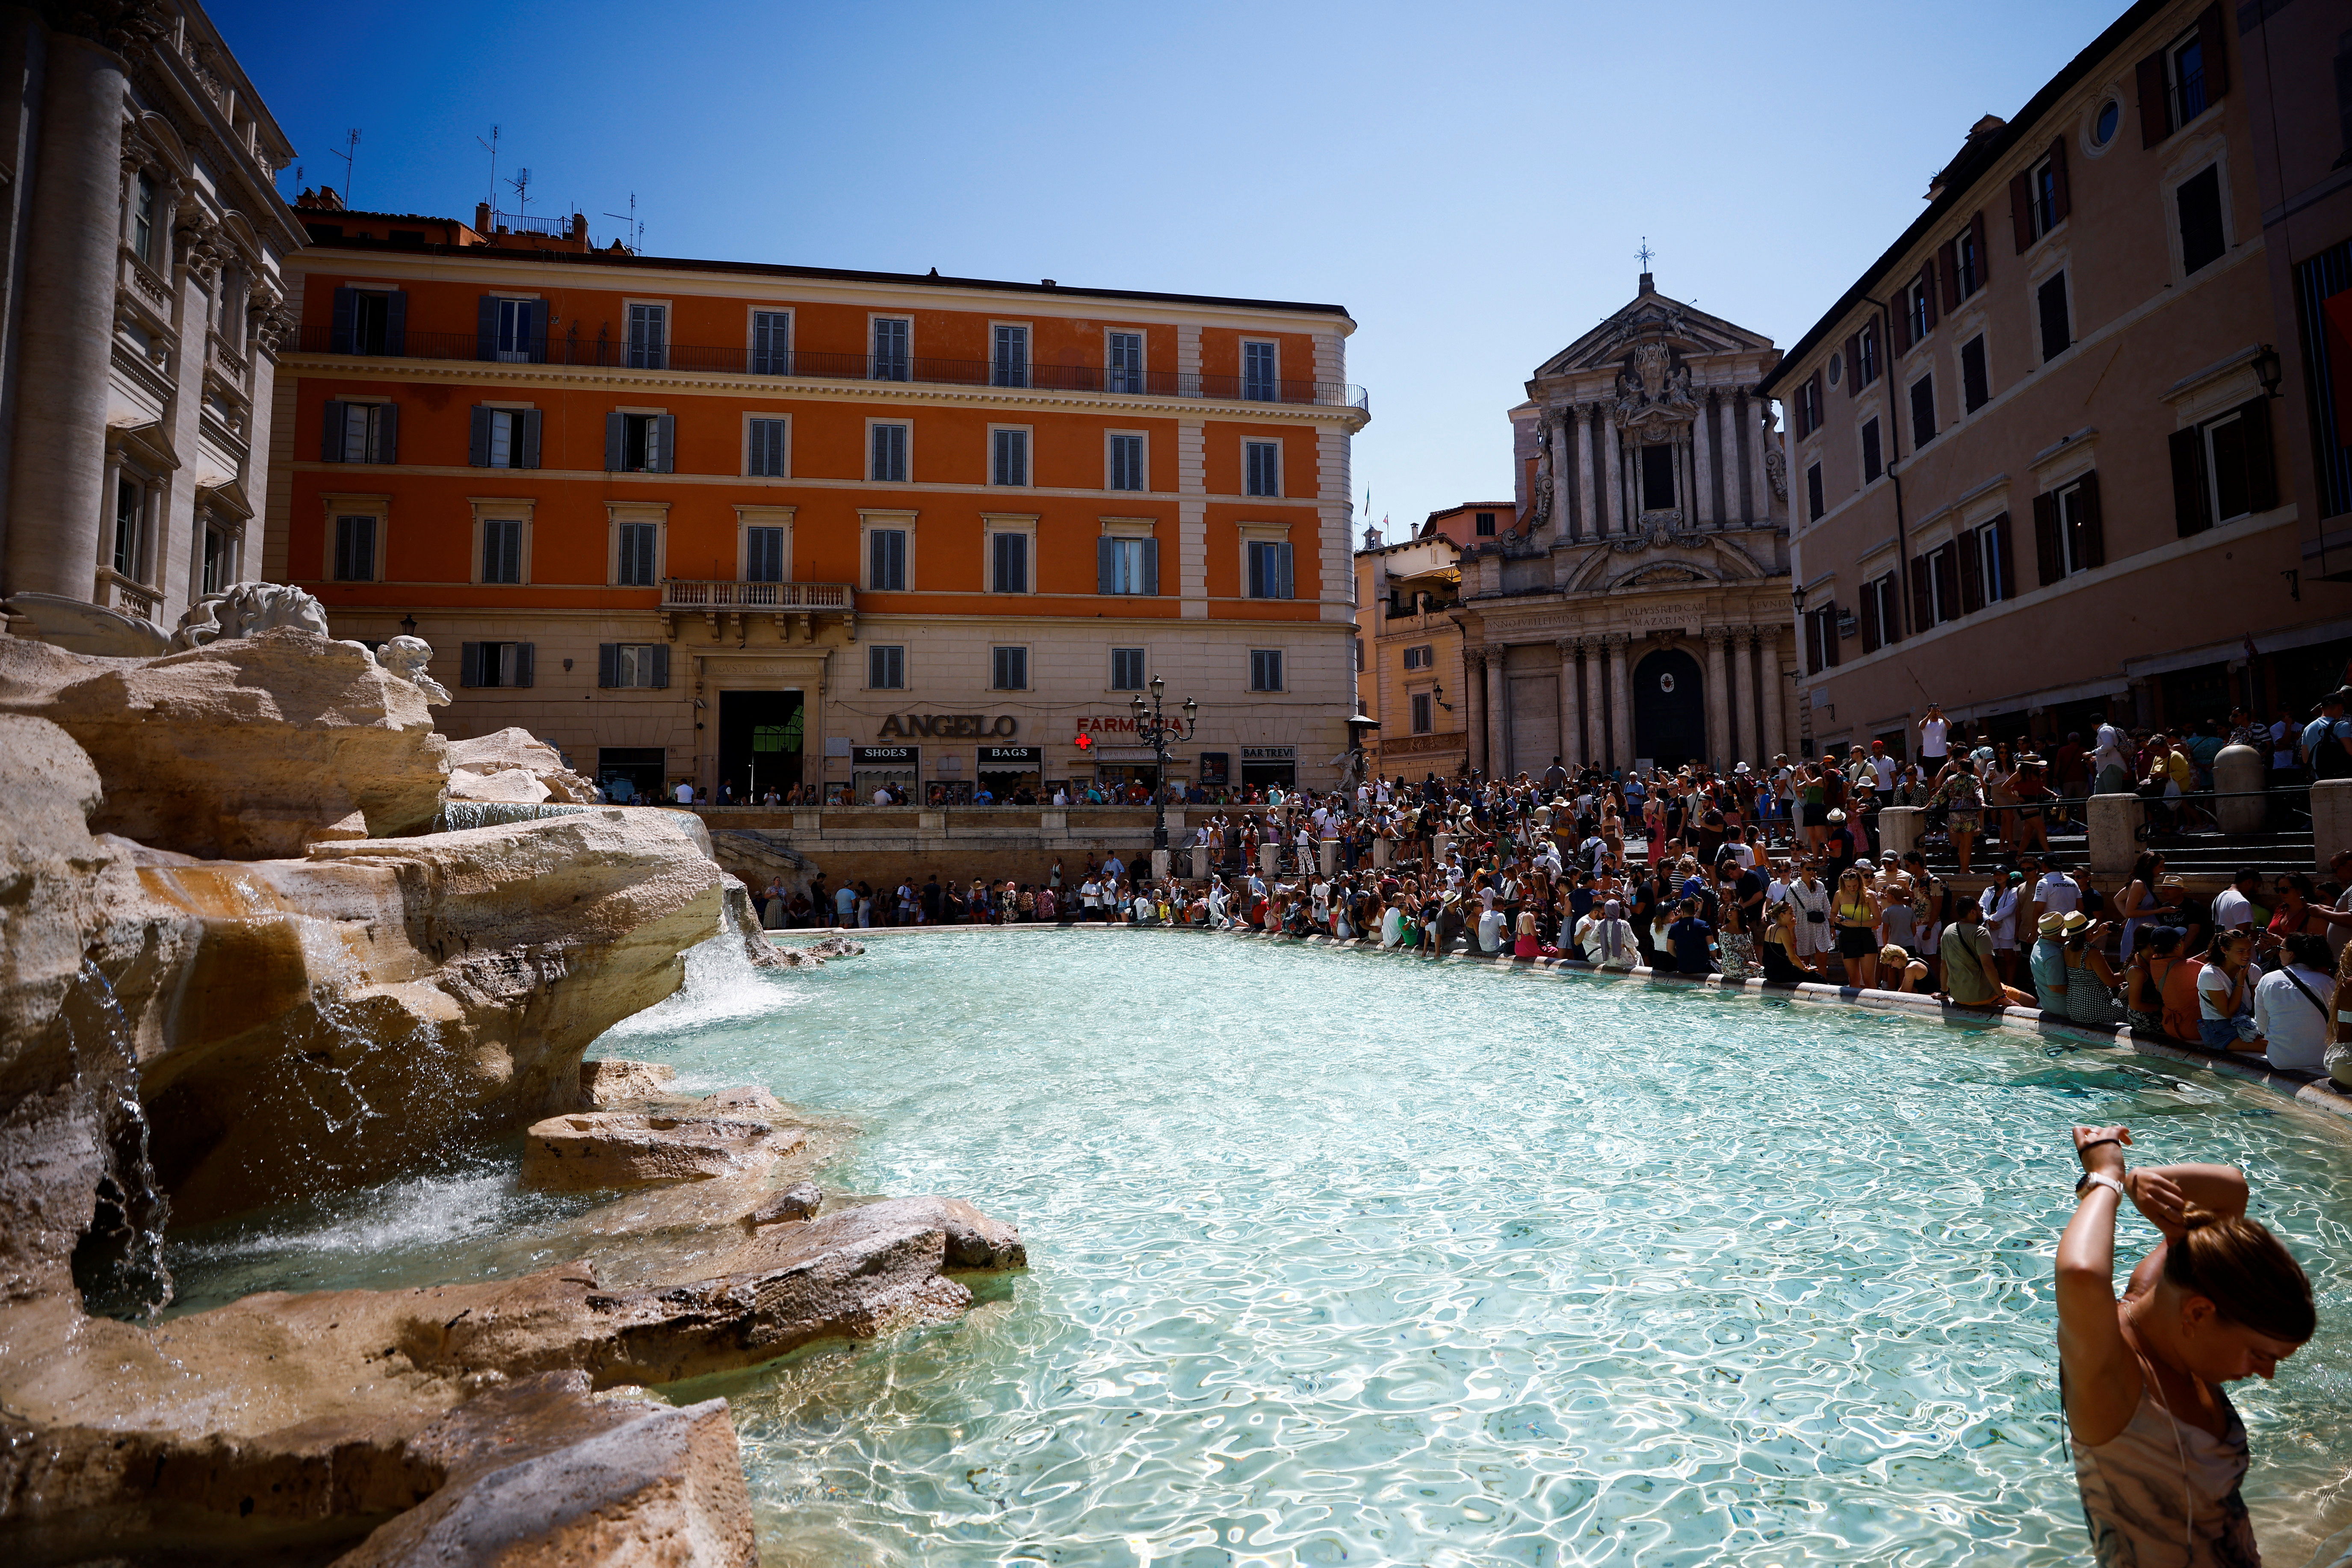 Tourists cool off at the Trevi Fountain in Rome amid record European temperatures.  (REUTERS/Guglielmo Mangiapane)